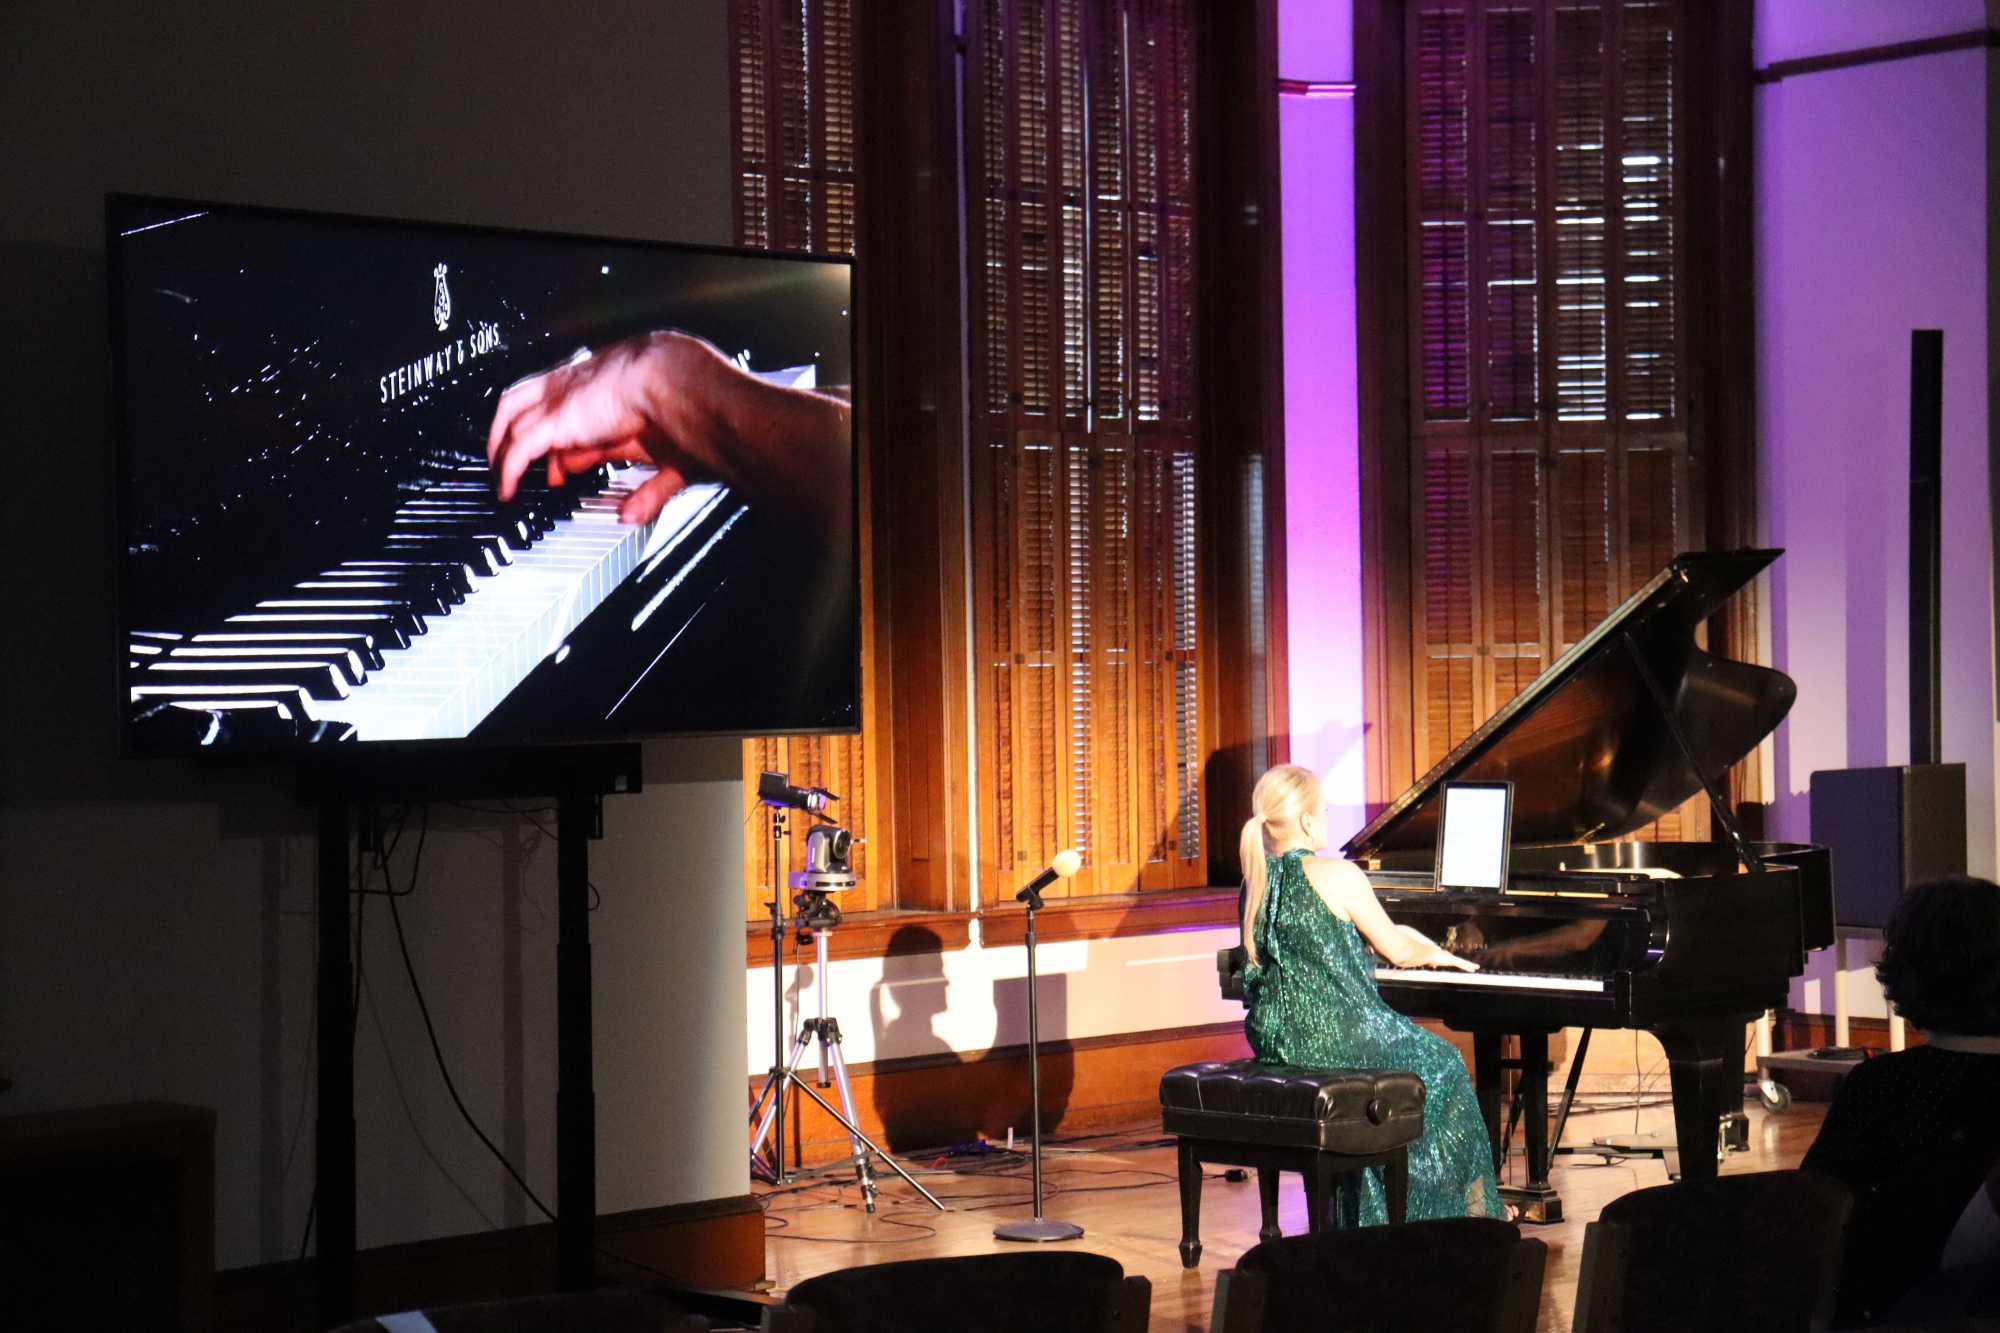 A camera focused just on the artist's hands, allowed the audience to see the complex nature of piano playing close-up.